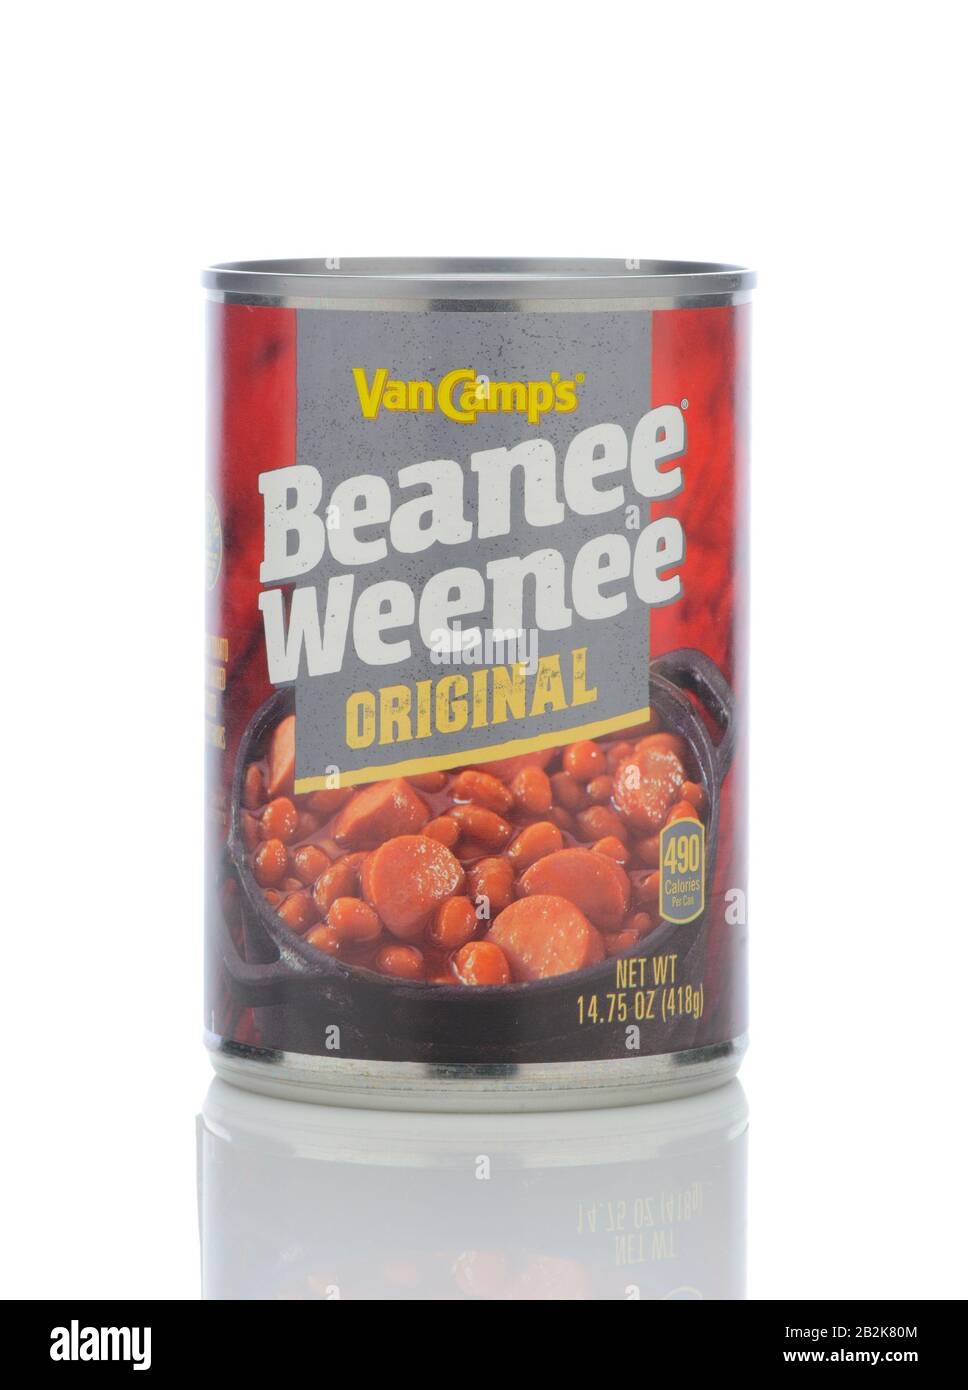 IRVINE, CALIFORNIA - MAY 23, 2019:  A can of Van Camps Beanee Weenee Original, cut up hot dogs mixed with baked beans, From Conagra Brands. Stock Photo